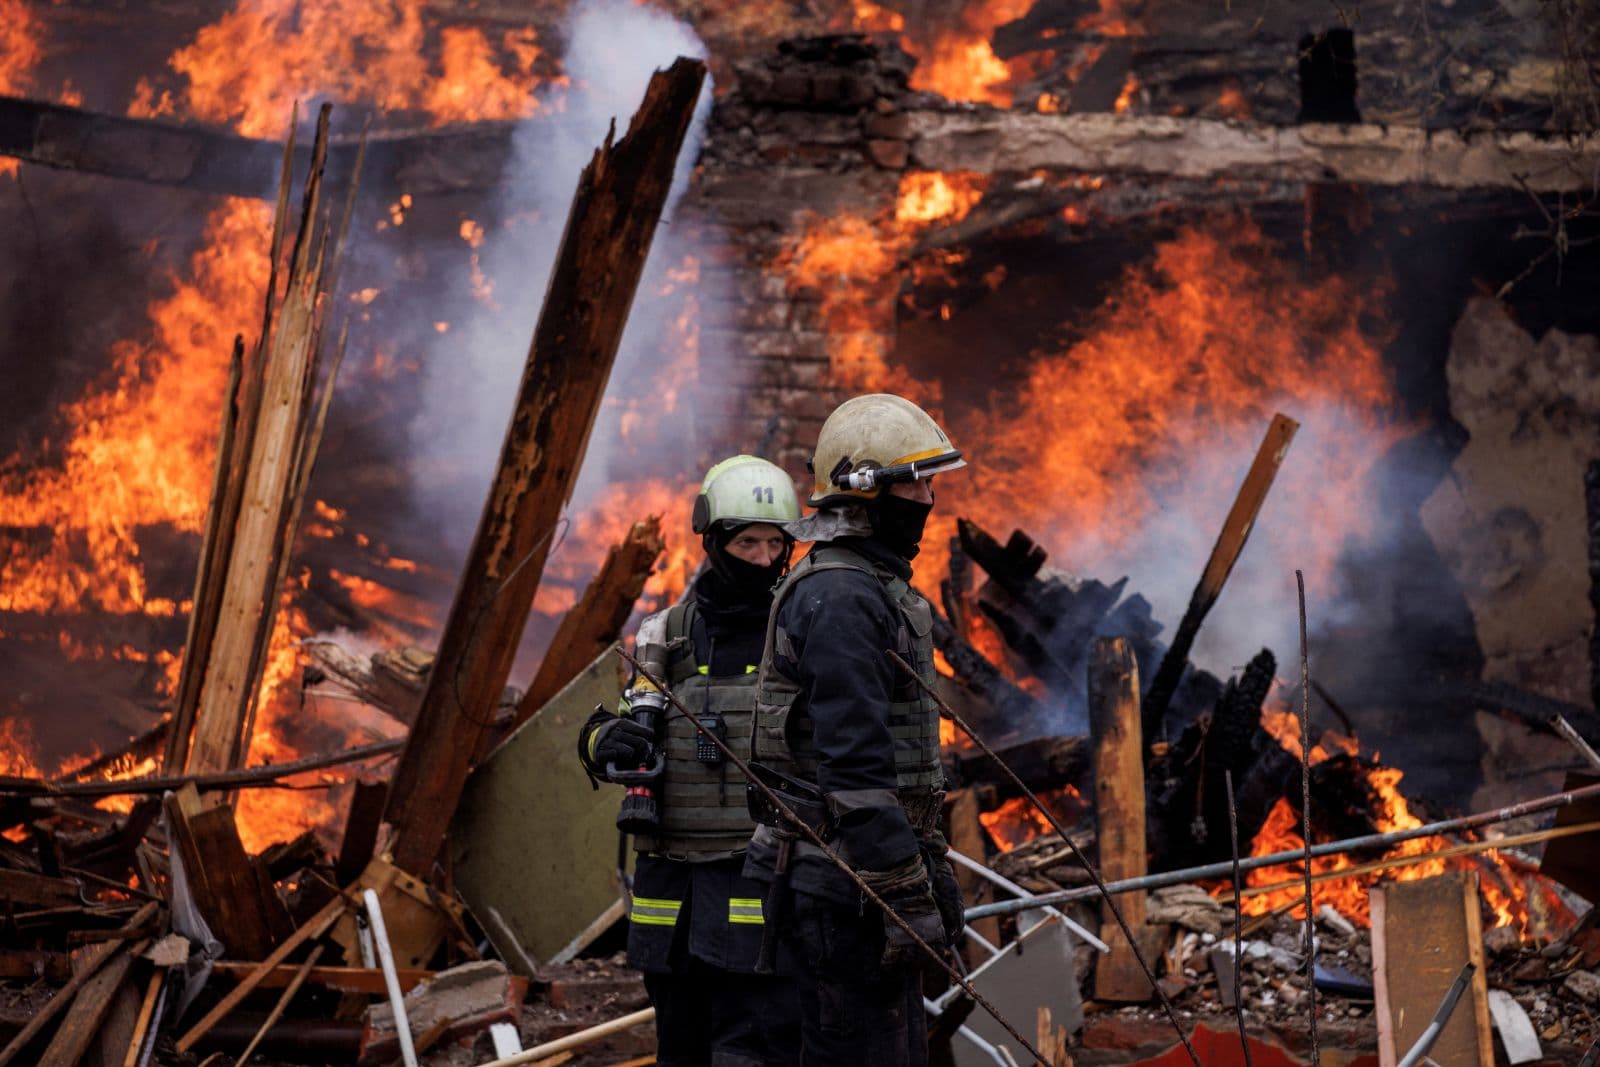 Firefighters work at a burning building in Kharkiv